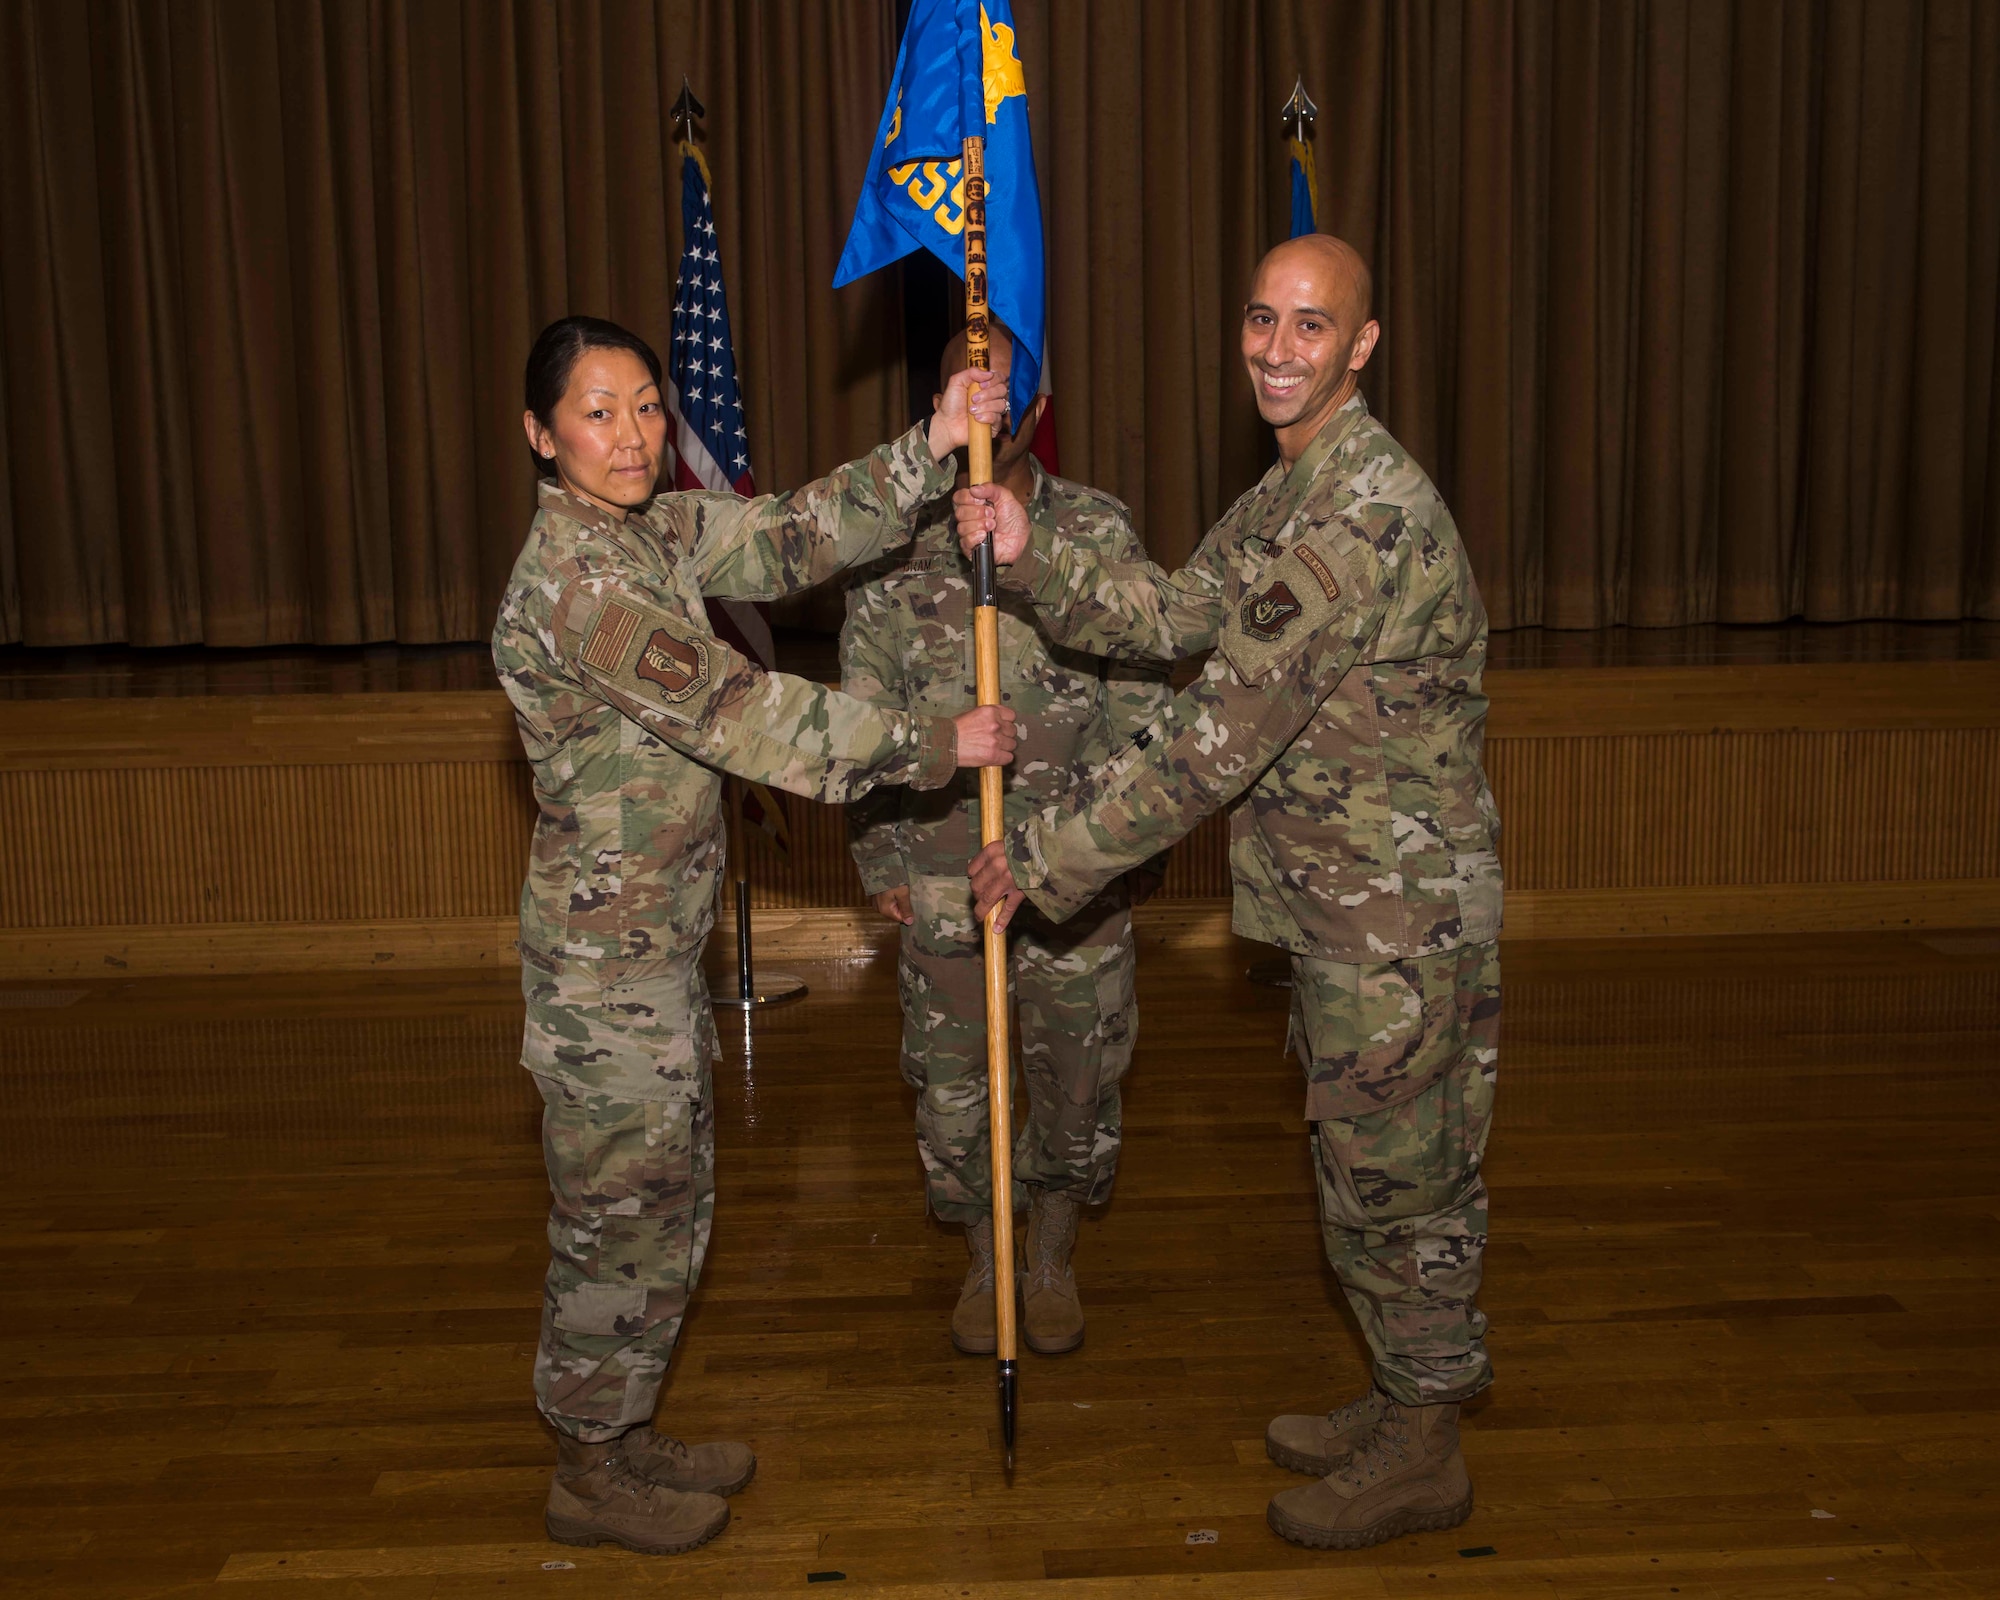 A female service member on the left passes a guidon to a male service member on the right.